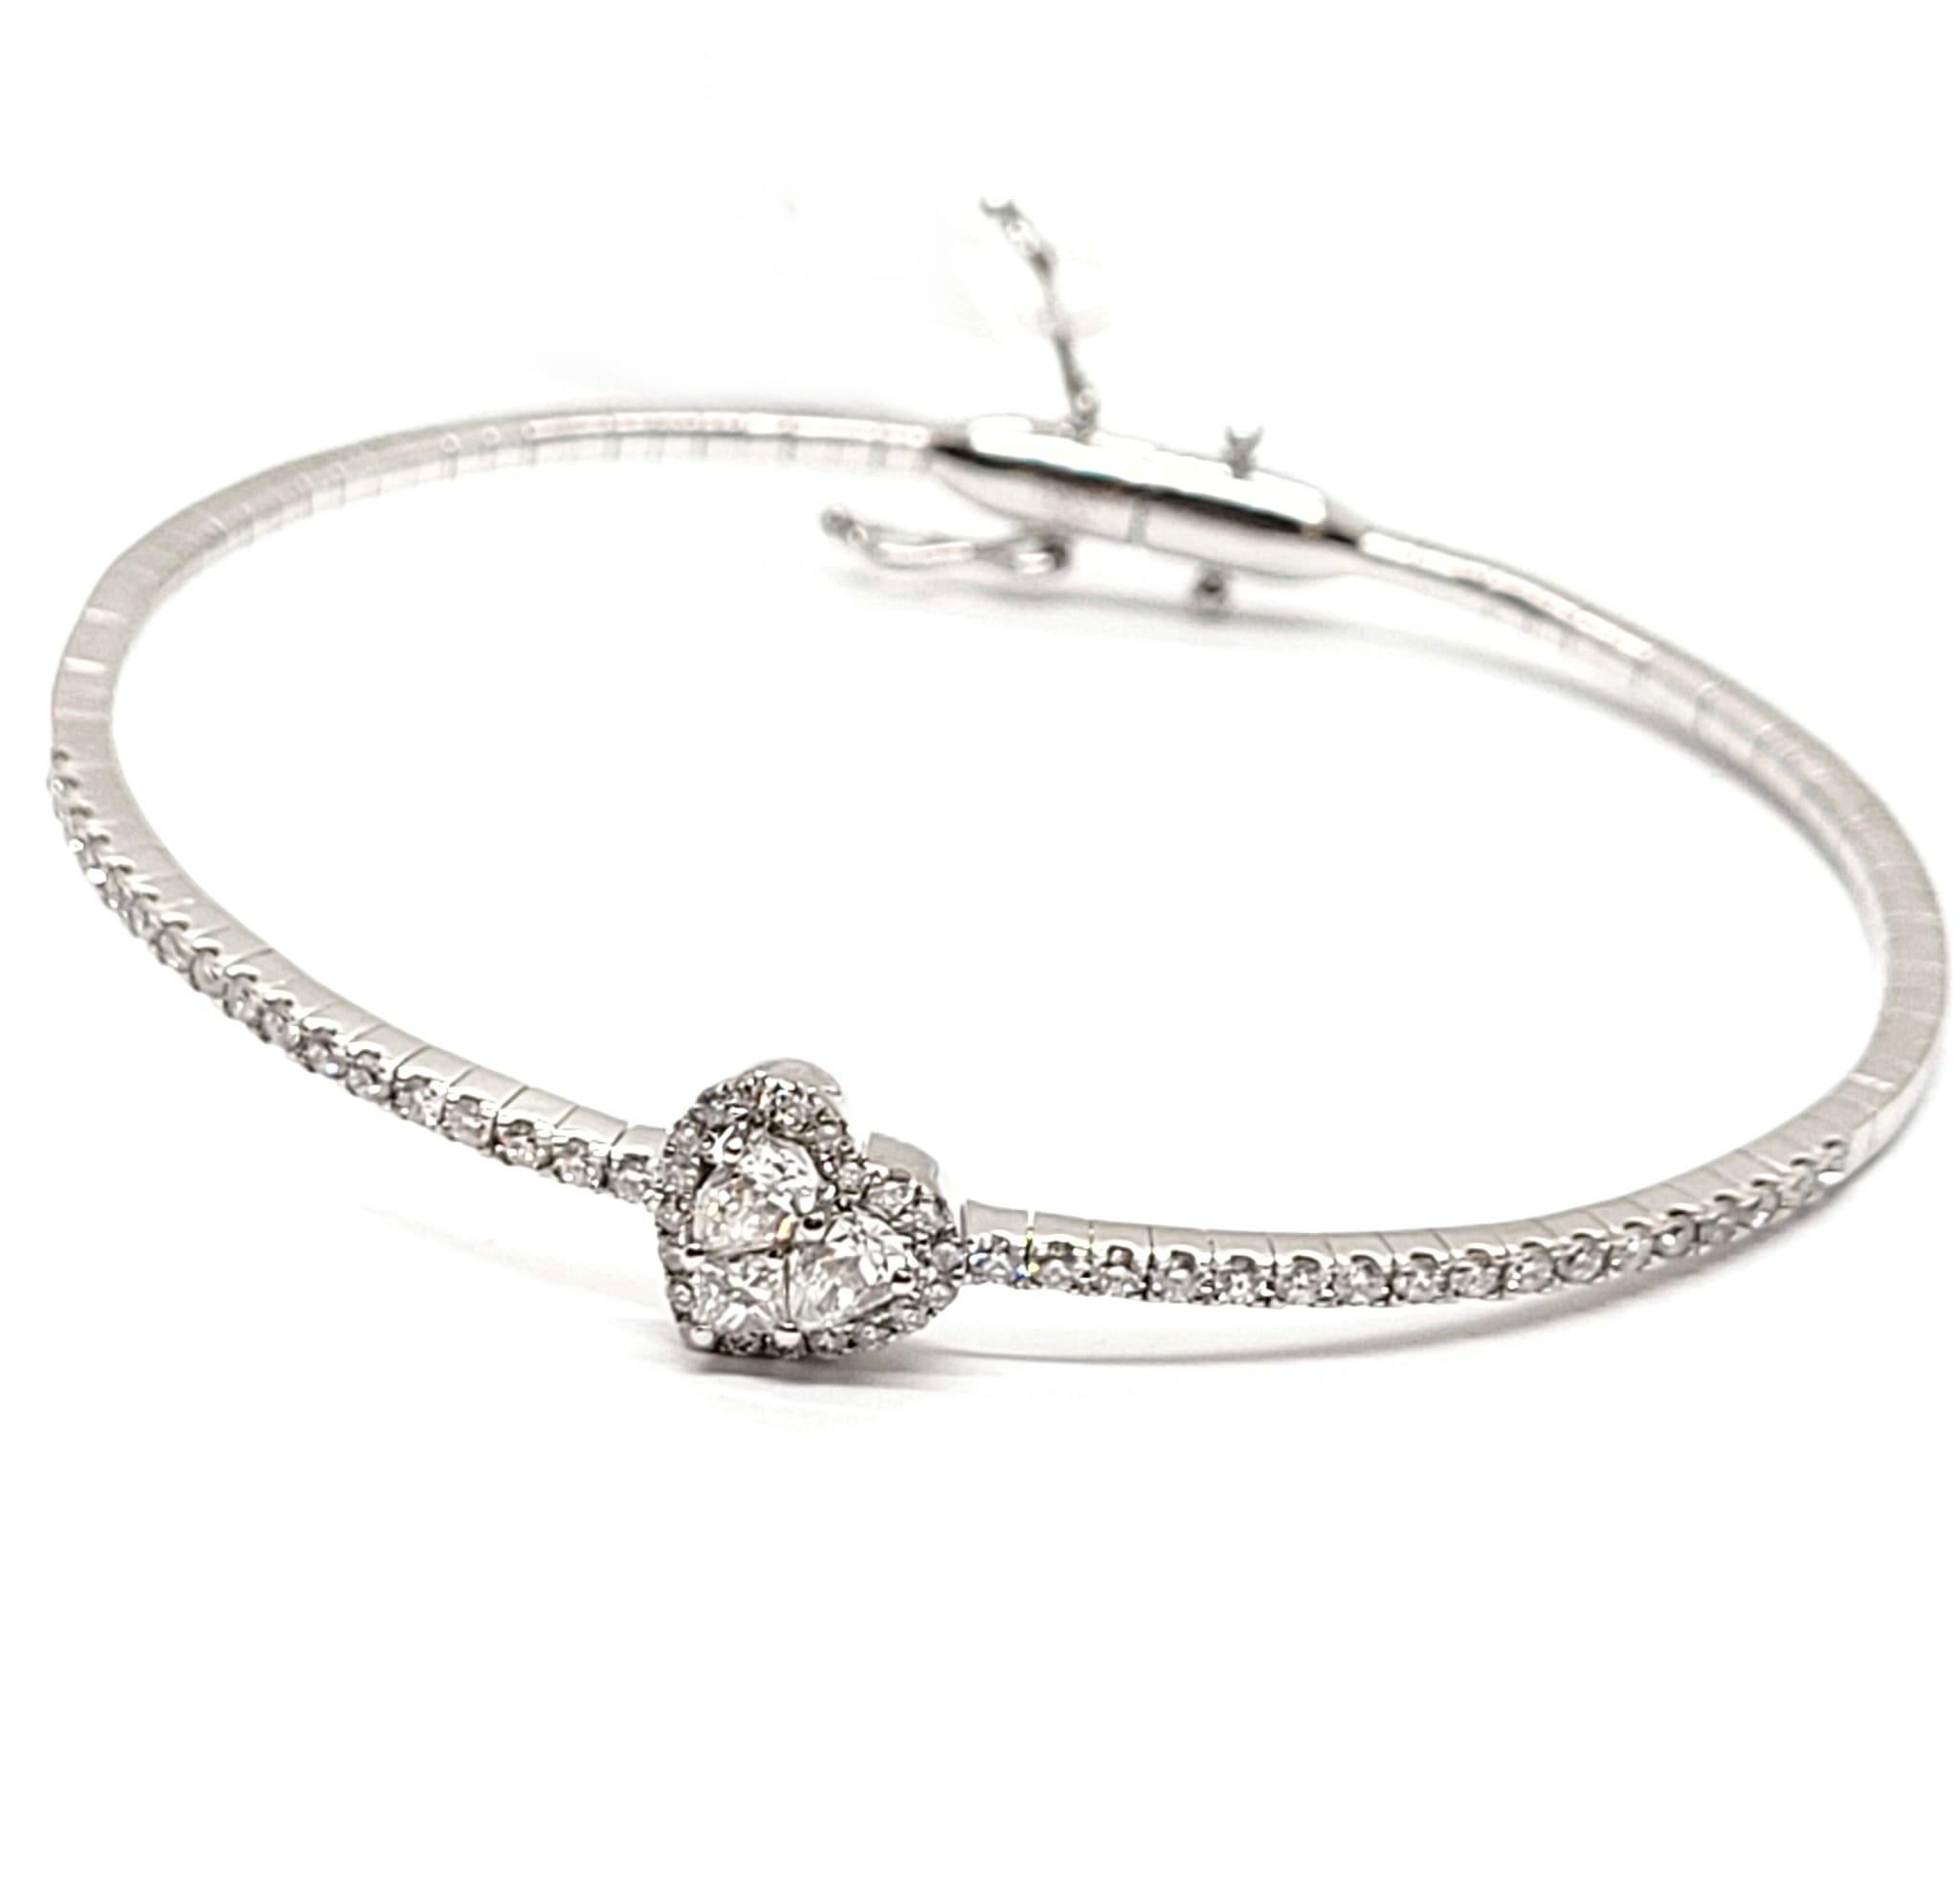 Andreoli Heart Shaped Invisible Diamond 18 Karat Gold Bangle Bracelet

This bracelet features:
- 0.77 Carat Diamond
- 7.99 g 18kt White Gold
- Made In Italy